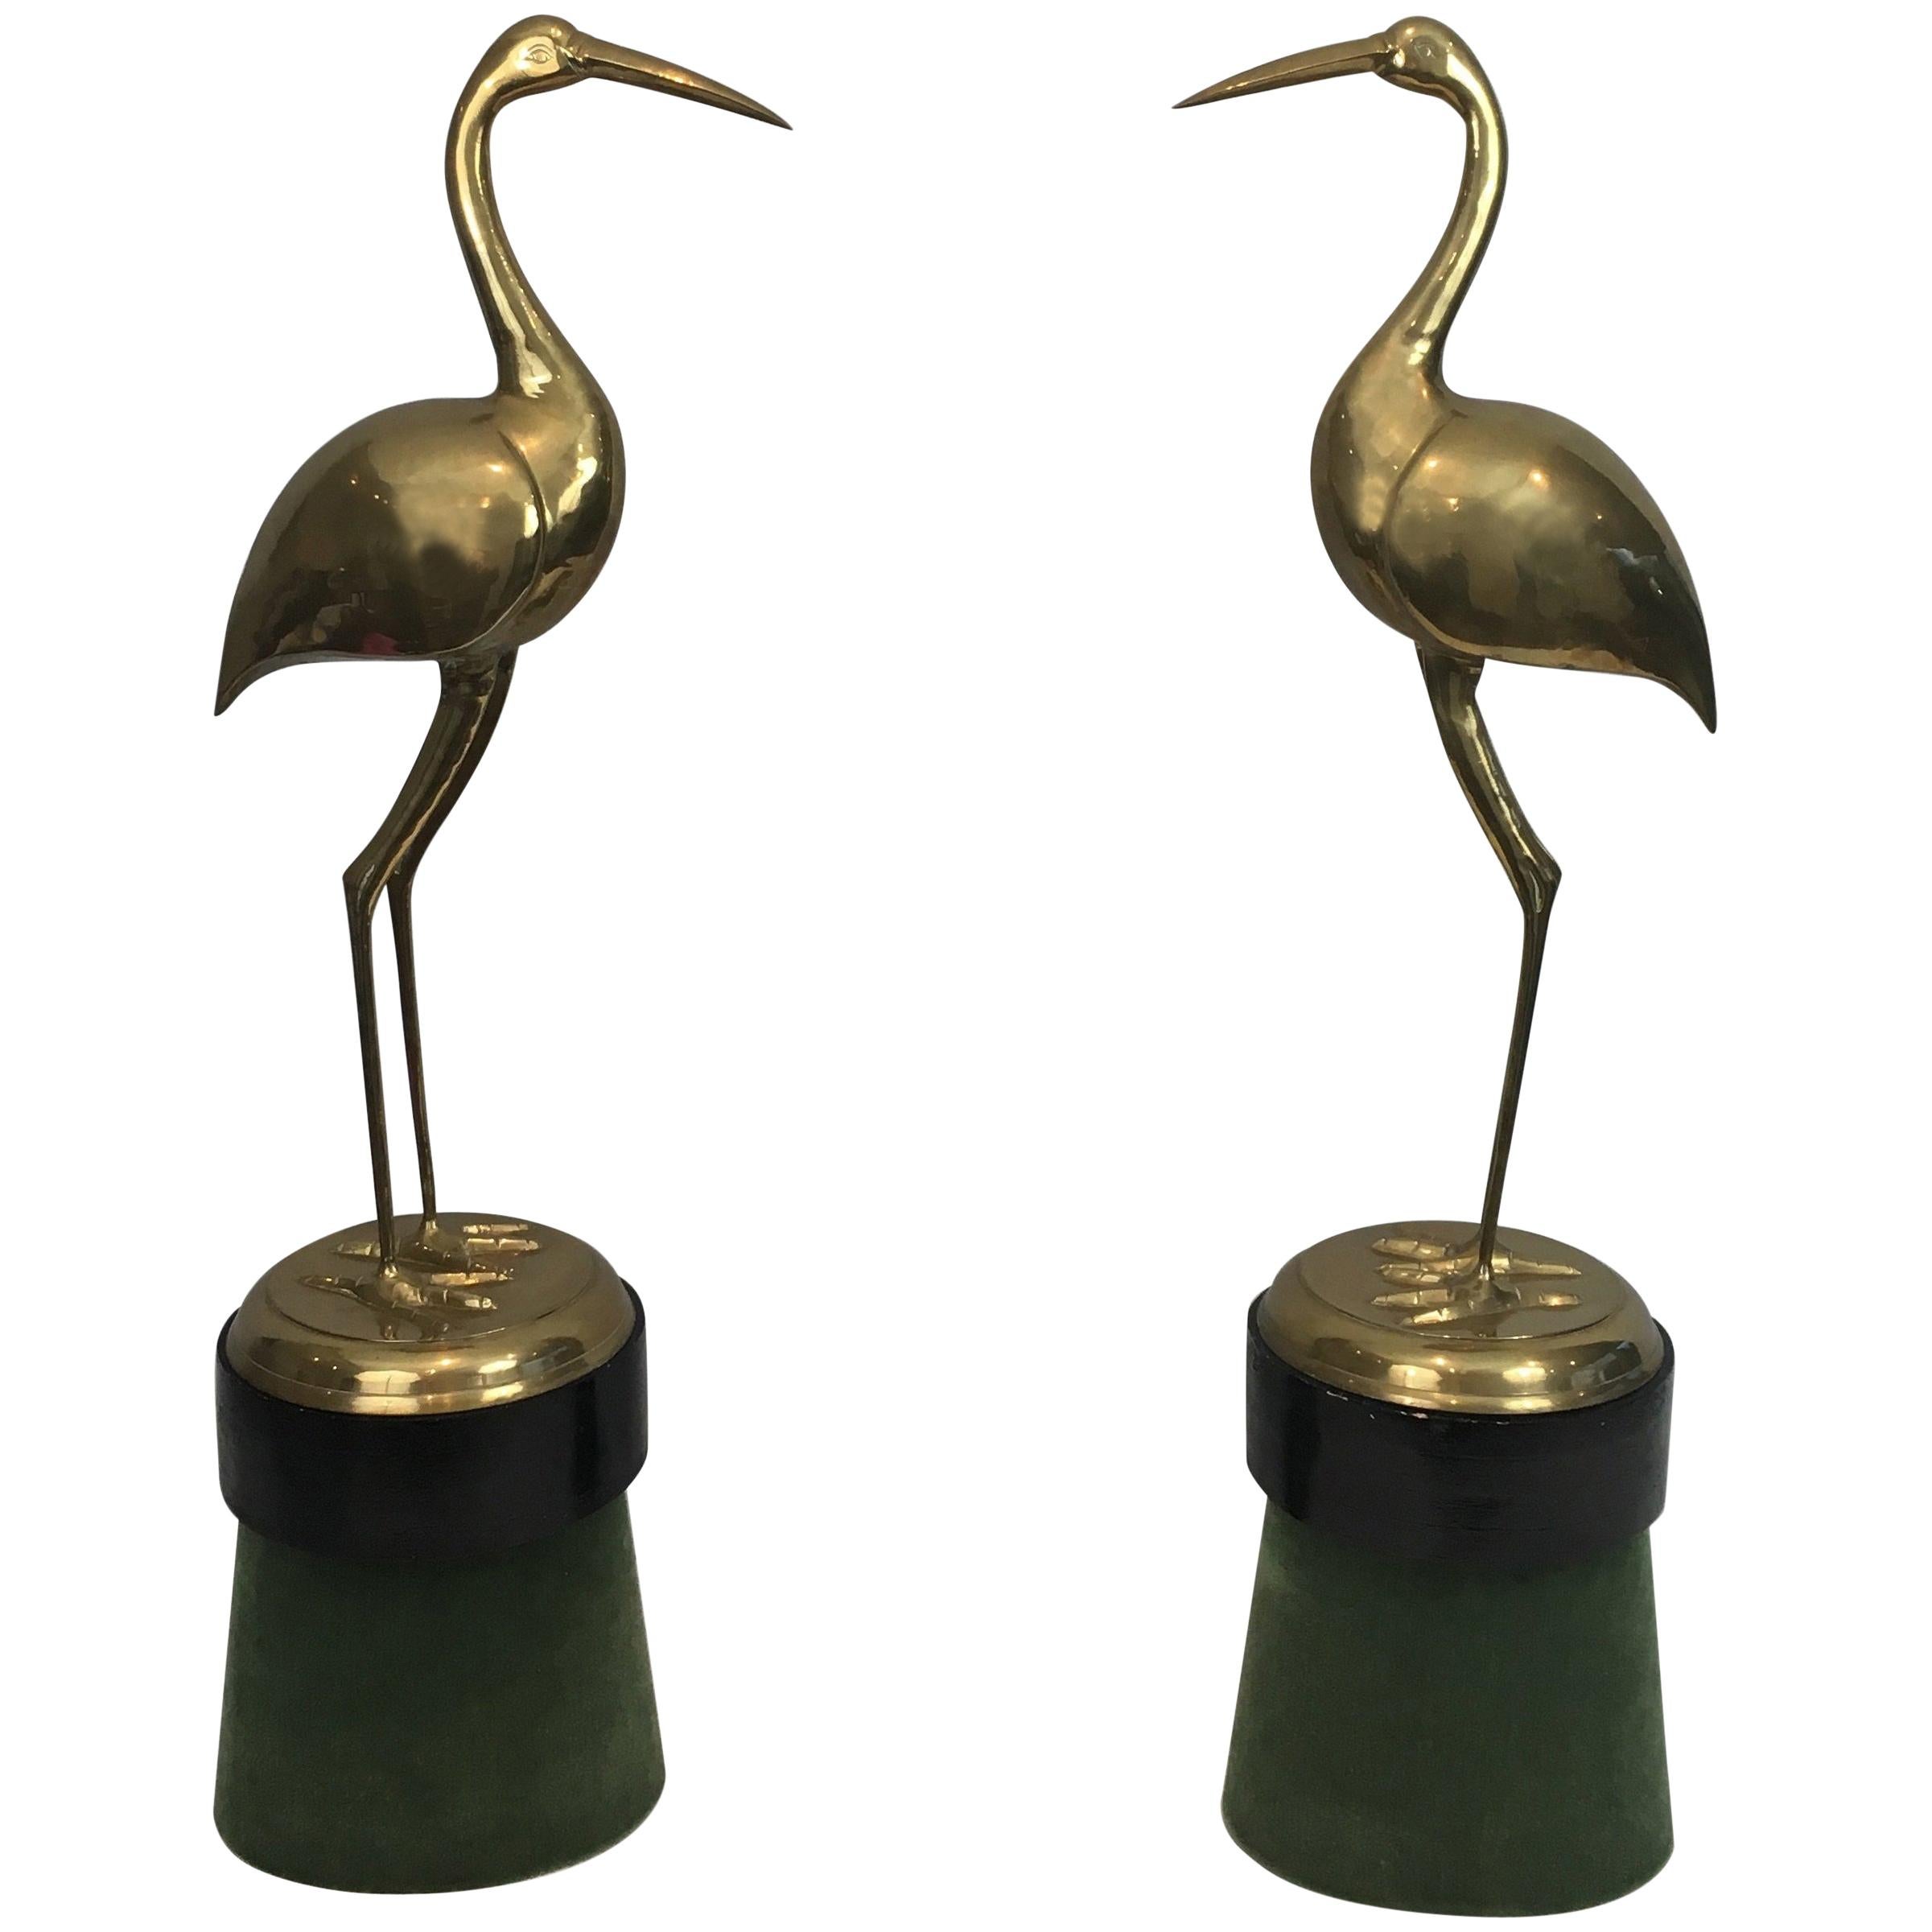 Pair of Decorative Brass Ibis on Wooden Stands